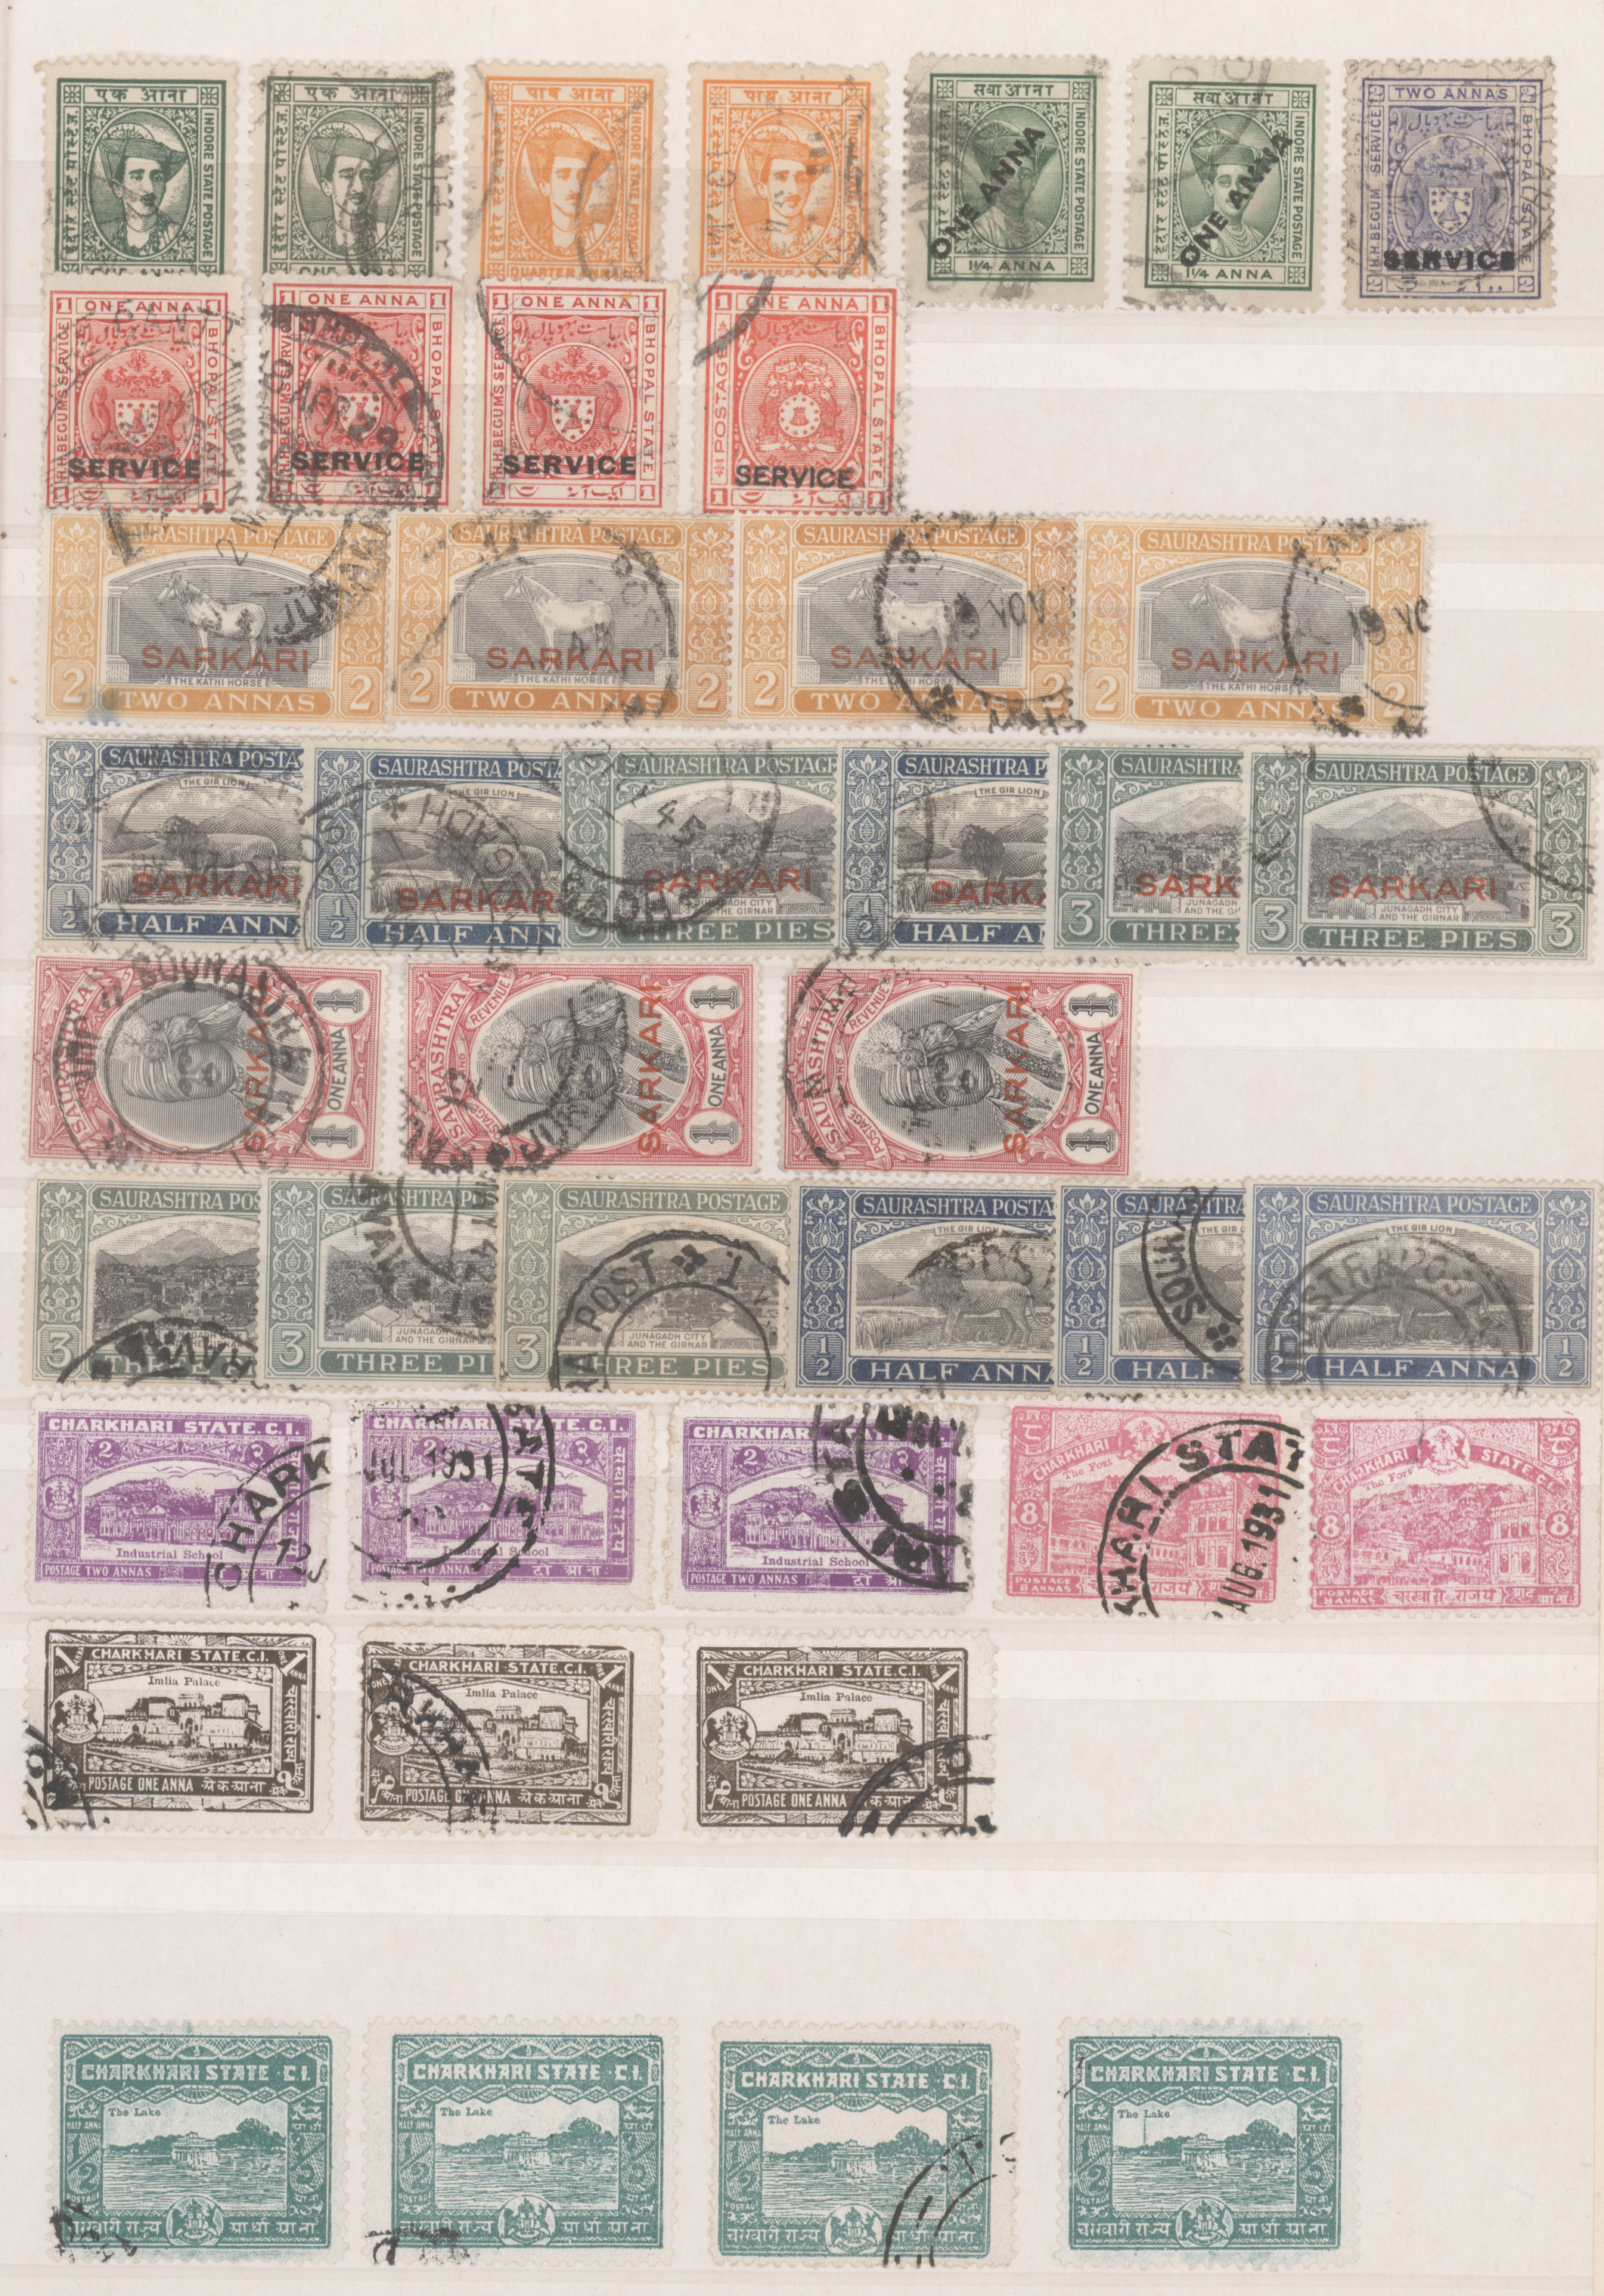 Lot 7343 - Indien - Feudalstaaten  -  Auktionshaus Christoph Gärtner GmbH & Co. KG 54th AUCTION - Day 4